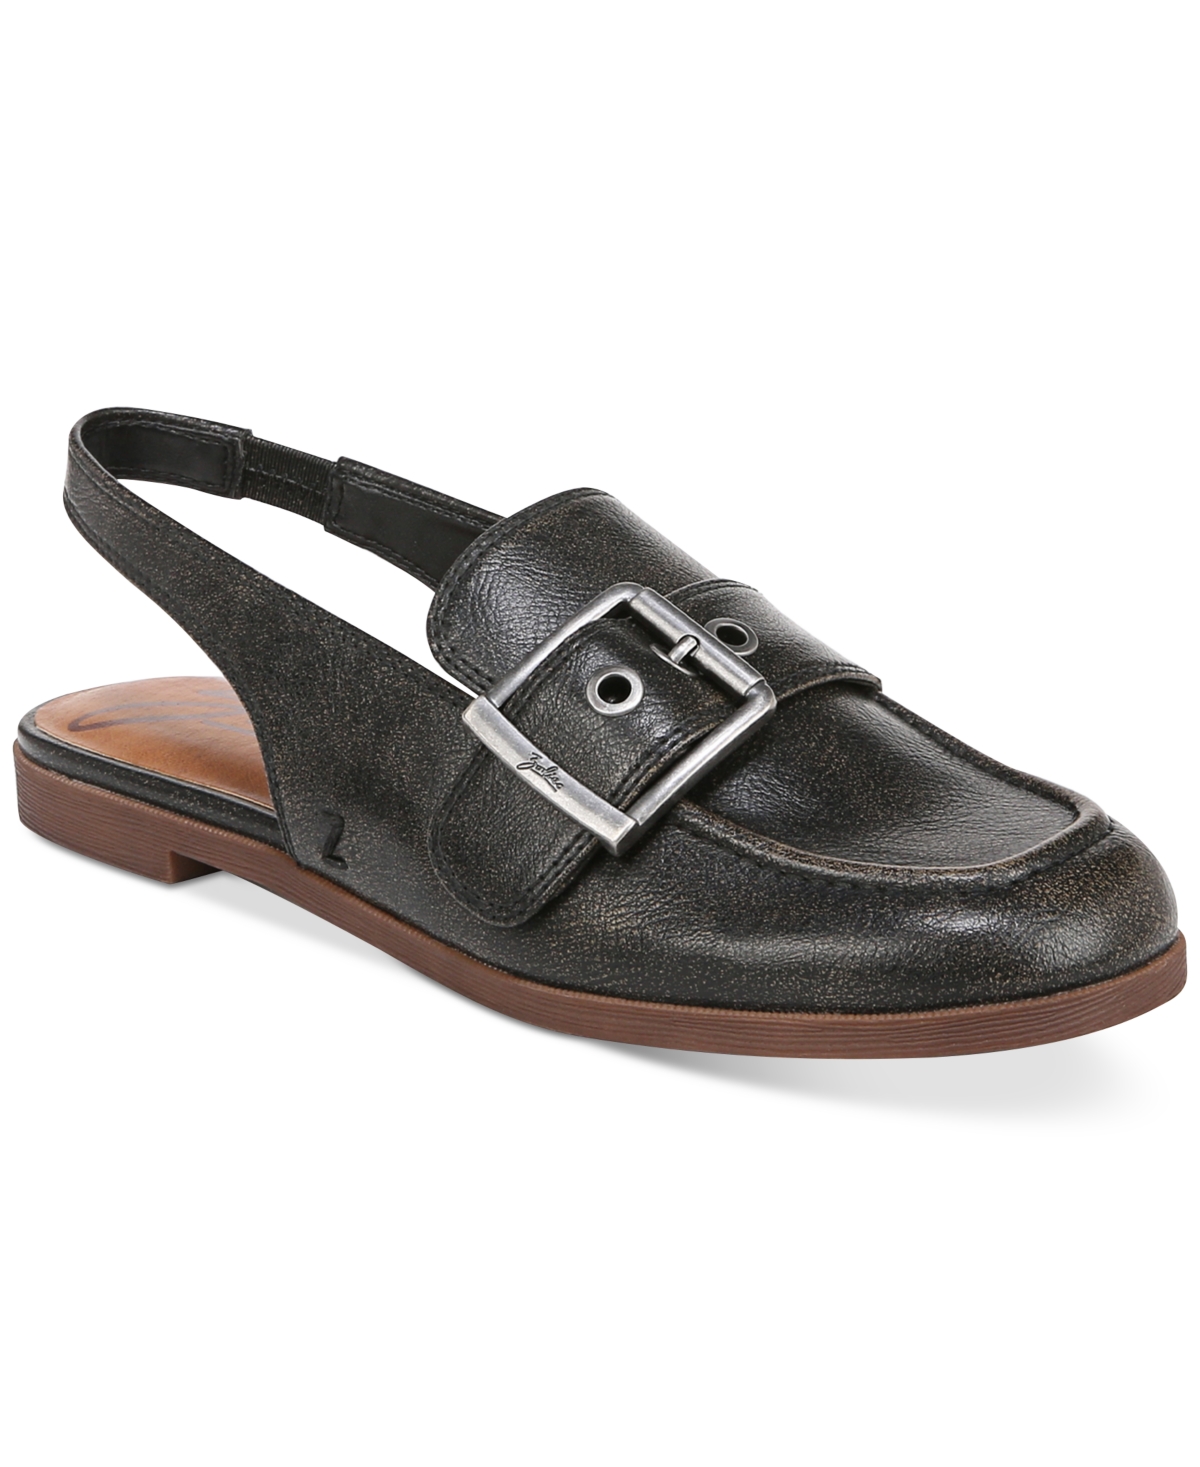 Women's Eve Buckled Slingback Tailored Loafer Flats - Silver